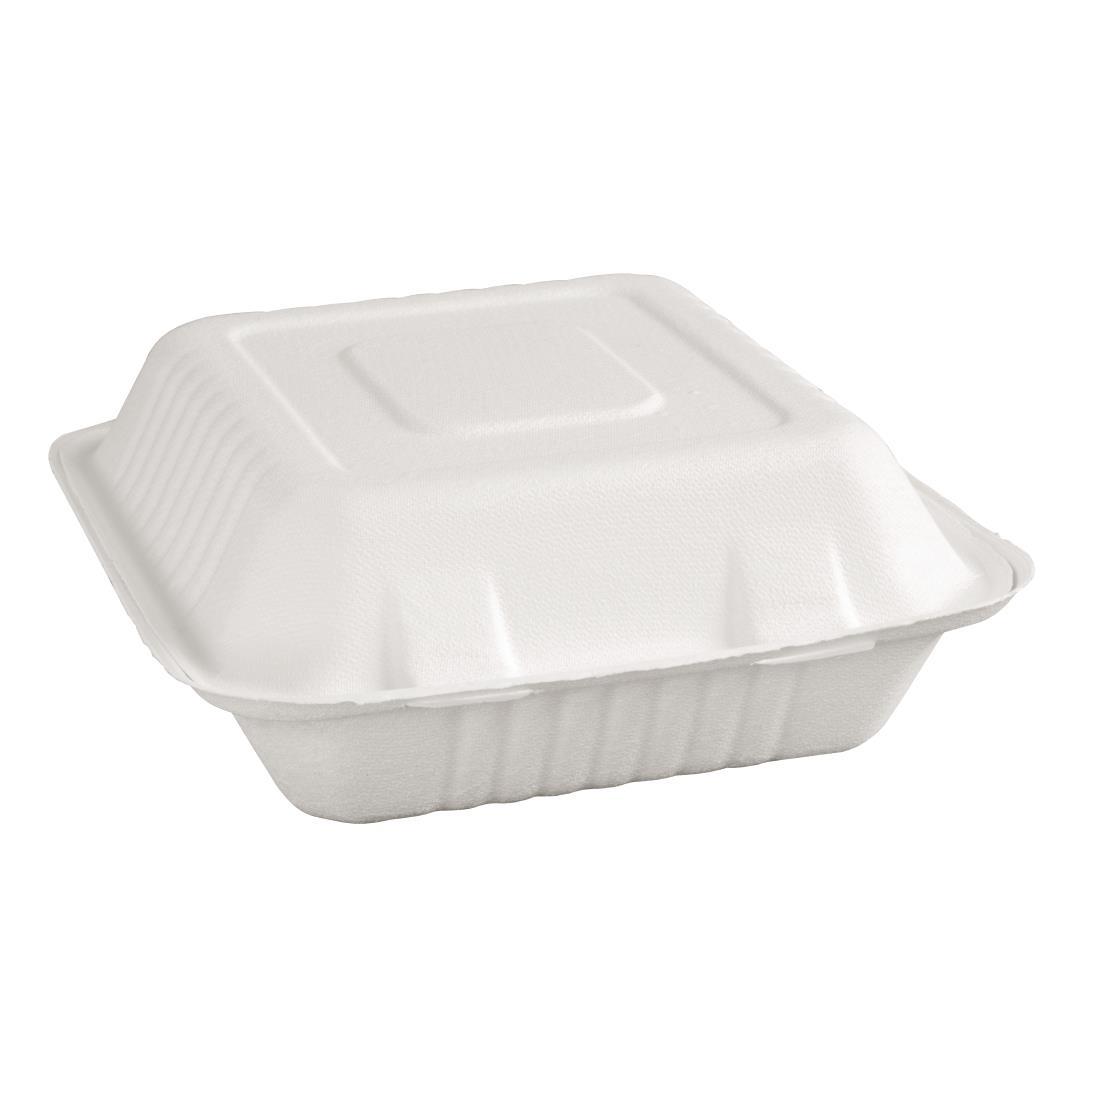 Fiesta Compostable Bagasse Hinged Food Containers 223mm (Pack of 200) - FC525  - 2